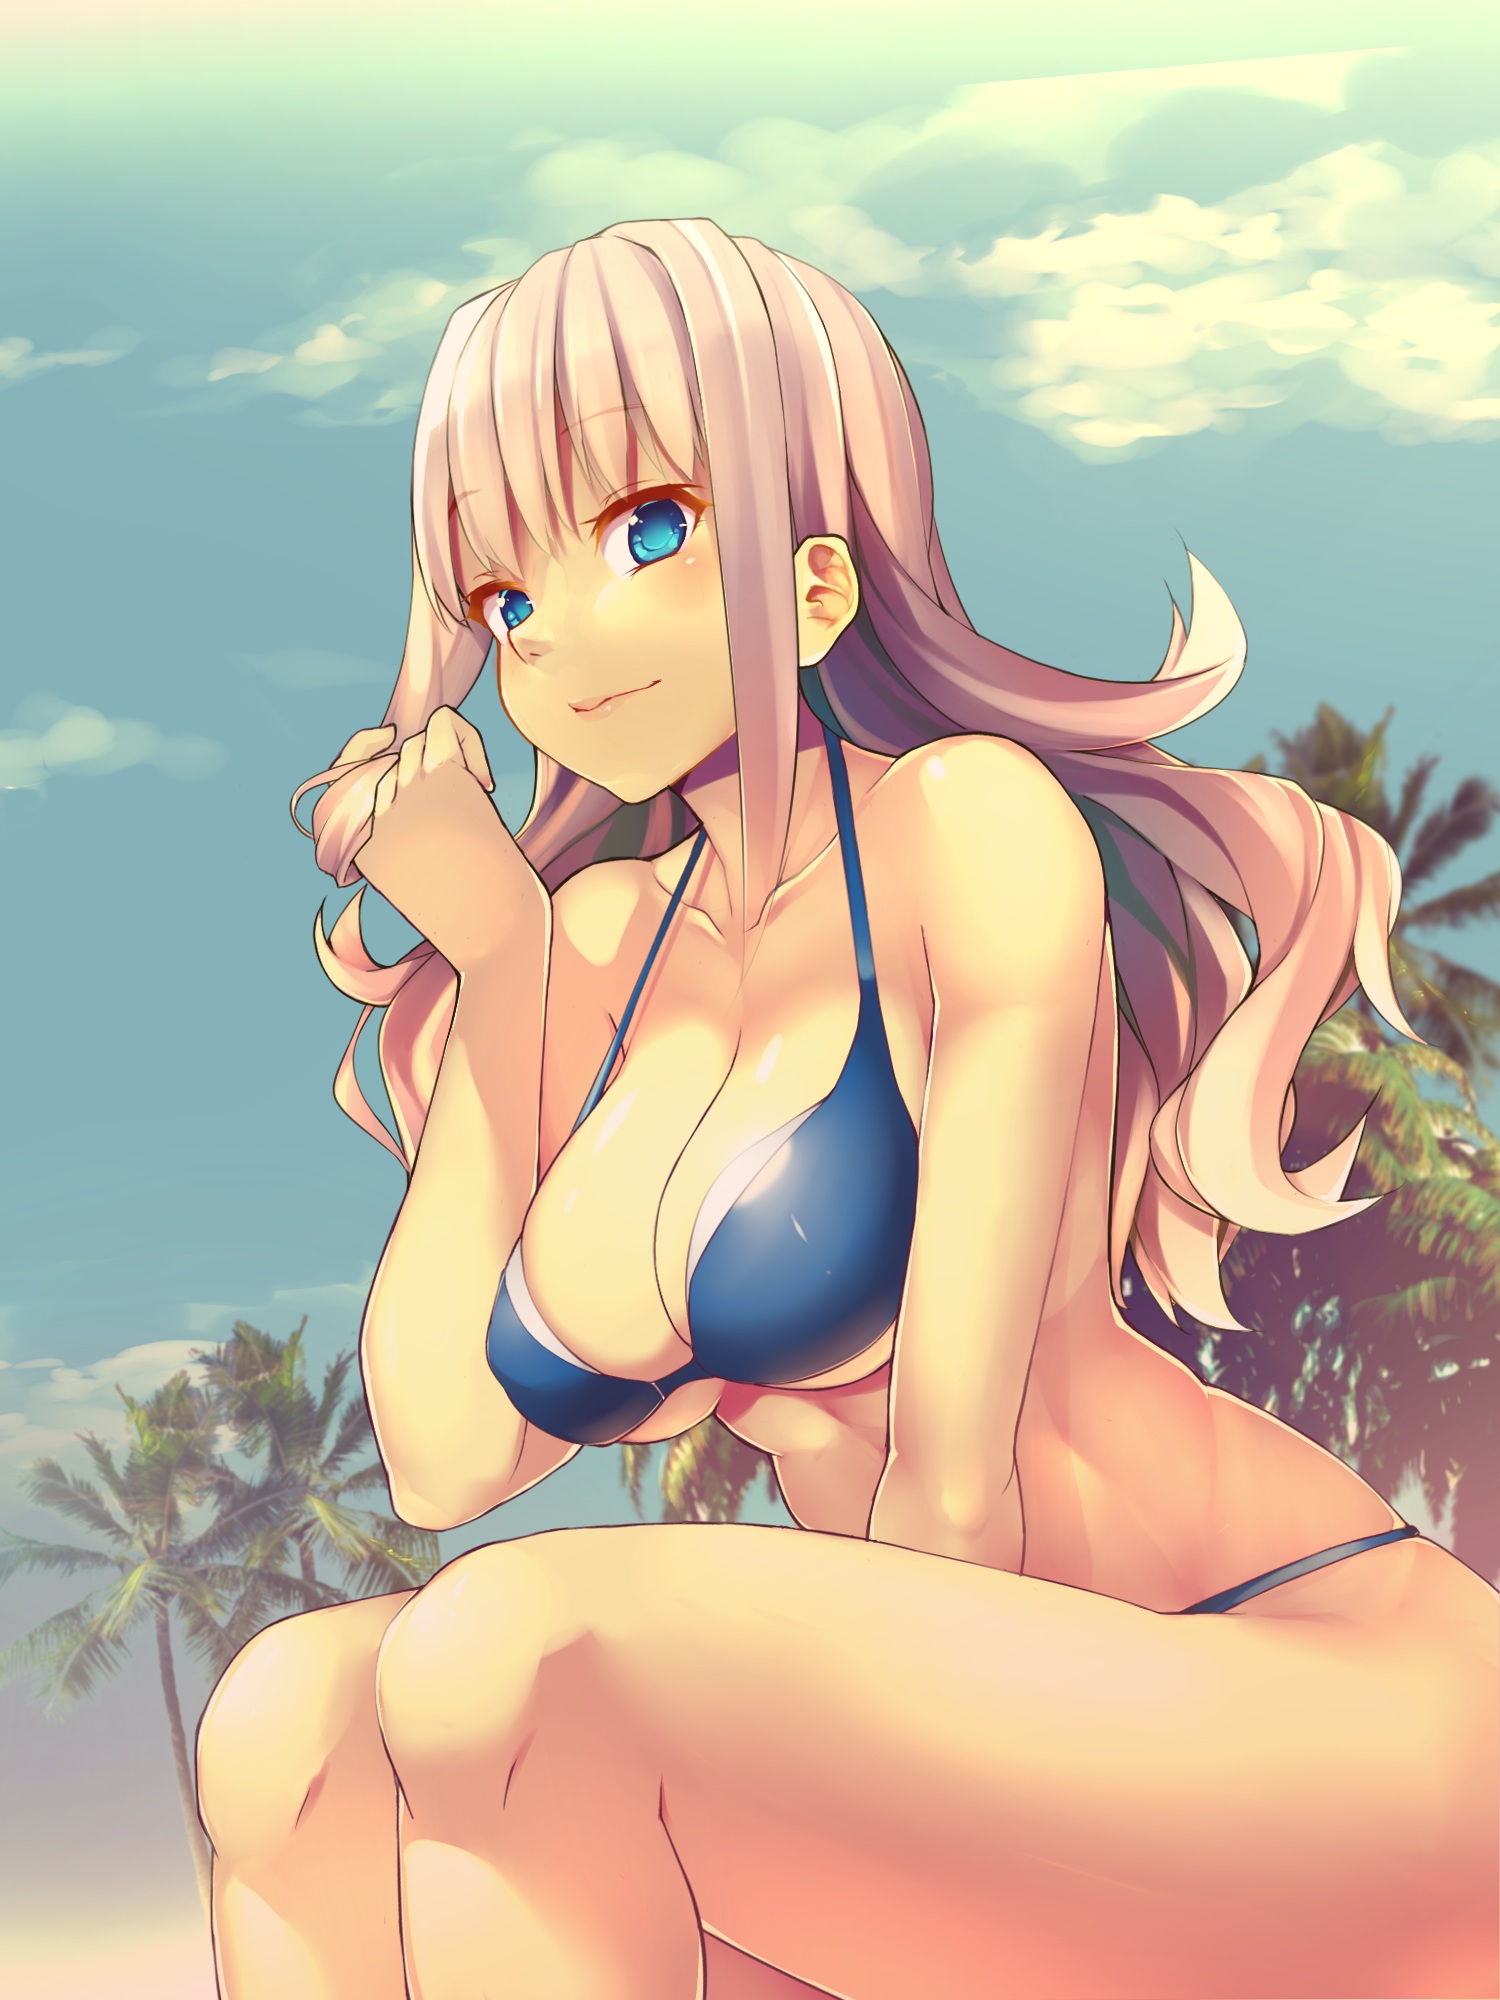 Anime 1500x2000 original characters bikini cleavage blue eyes low-angle anime anime girls clouds palm trees big boobs blue bikini pink hair looking at viewer legs legs together twirling hair thighs together thighs beach